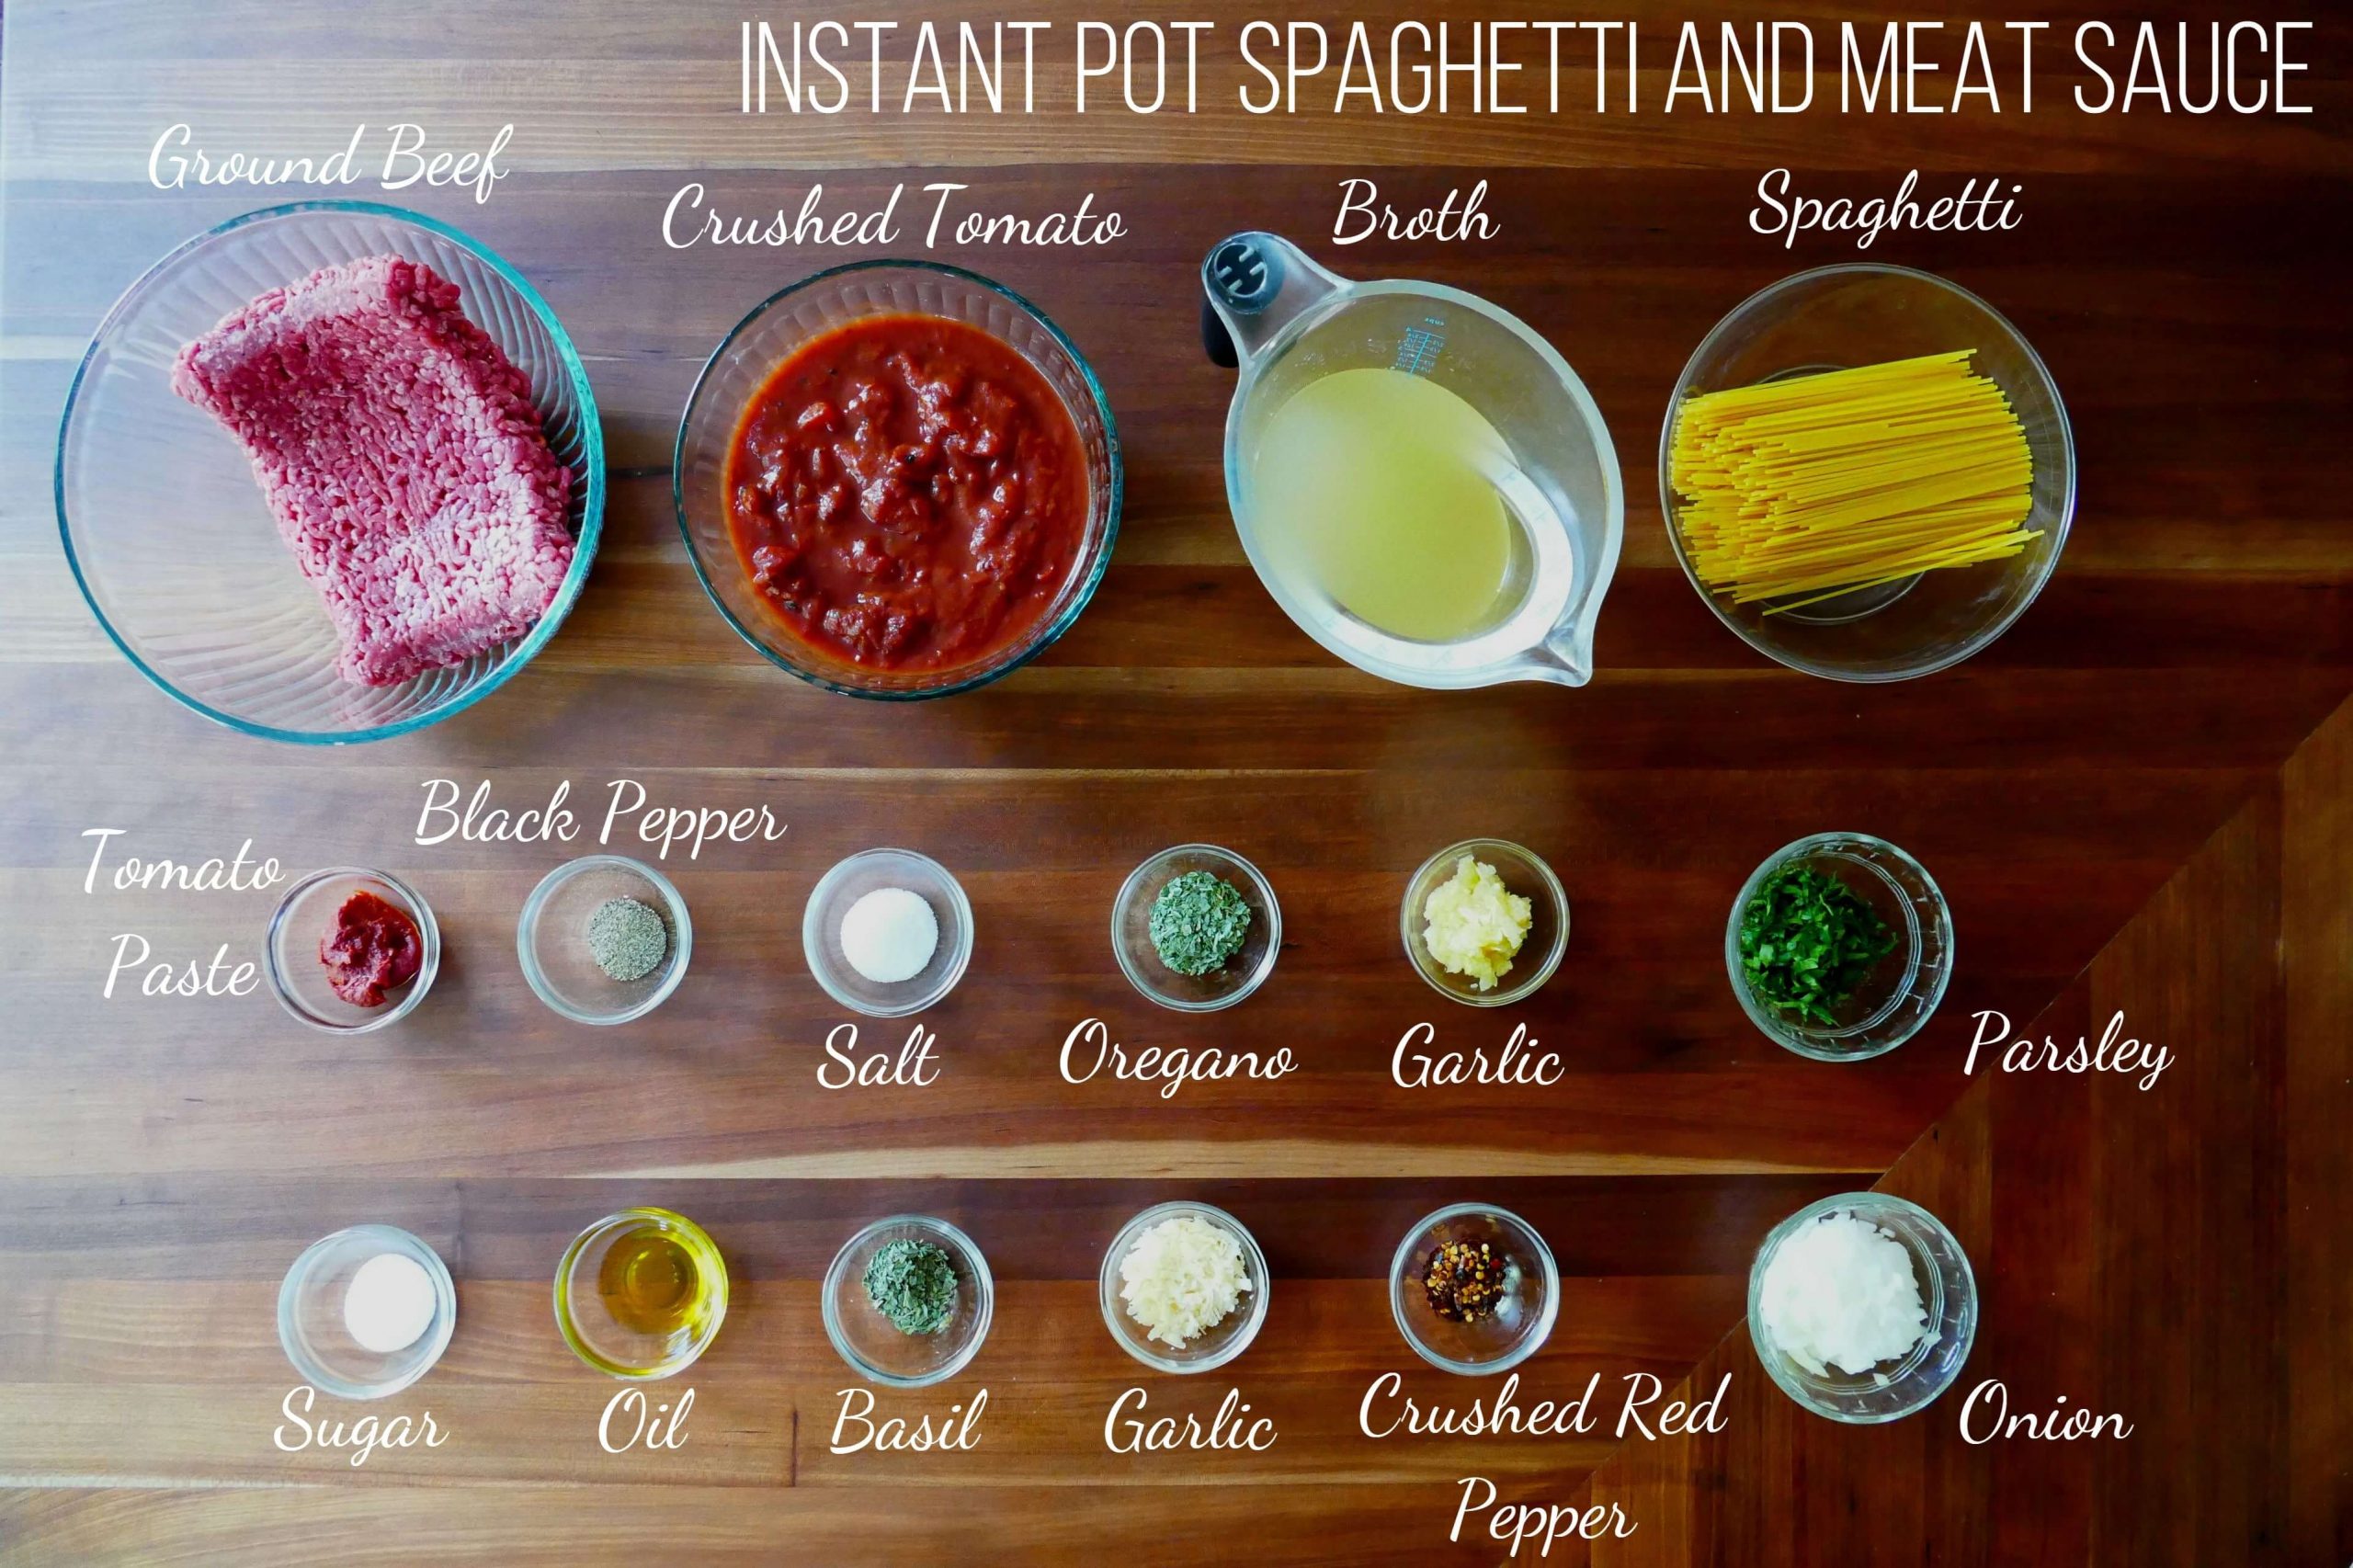 Instant Pot Spaghetti and Meat Sauce Ingredients - ground beef, crushed tomato, broth, spaghetti, tomato paste, black pepper, salt, oregano, garlic, parsley, sugar, oil, basil, garlic, crushed red pepper, onion - Paint the Kitchen Red